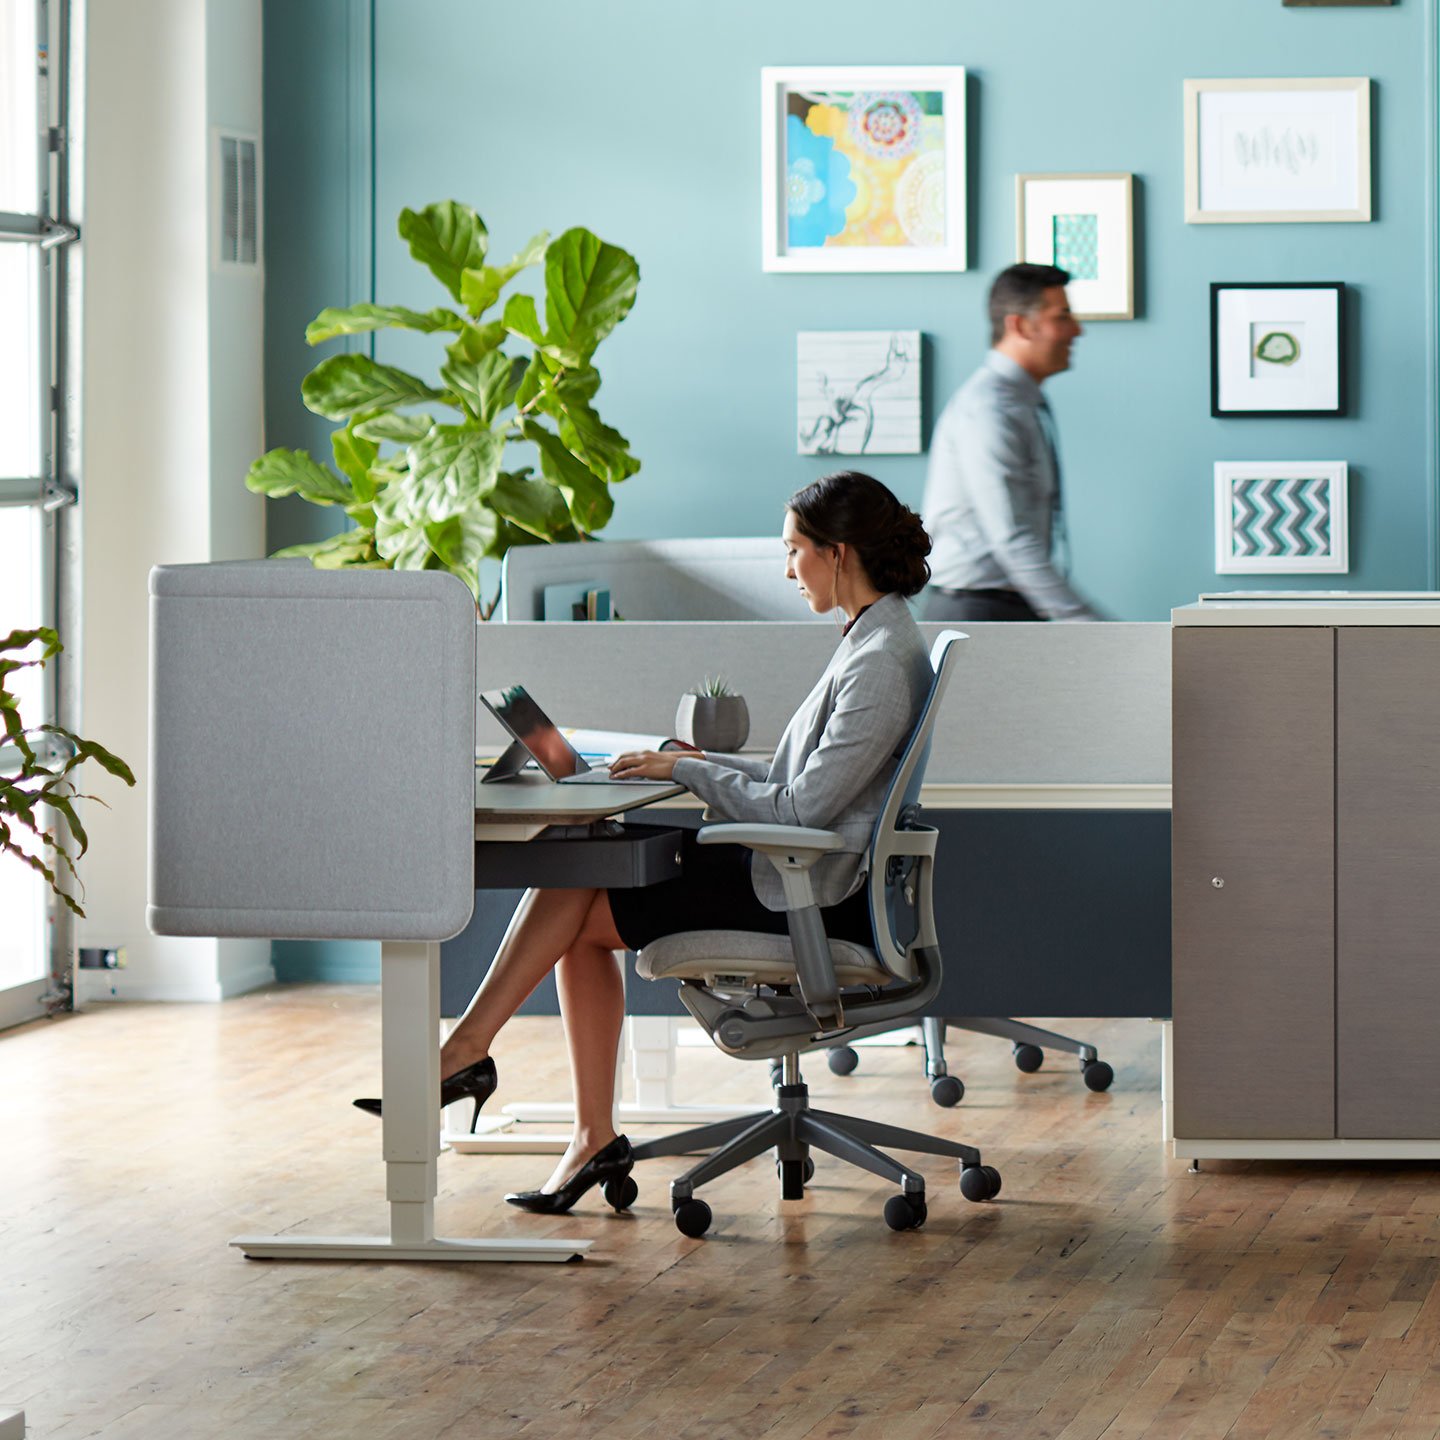 Haworth Compose Connections workspace divider in grey in an office area with employee working at desk